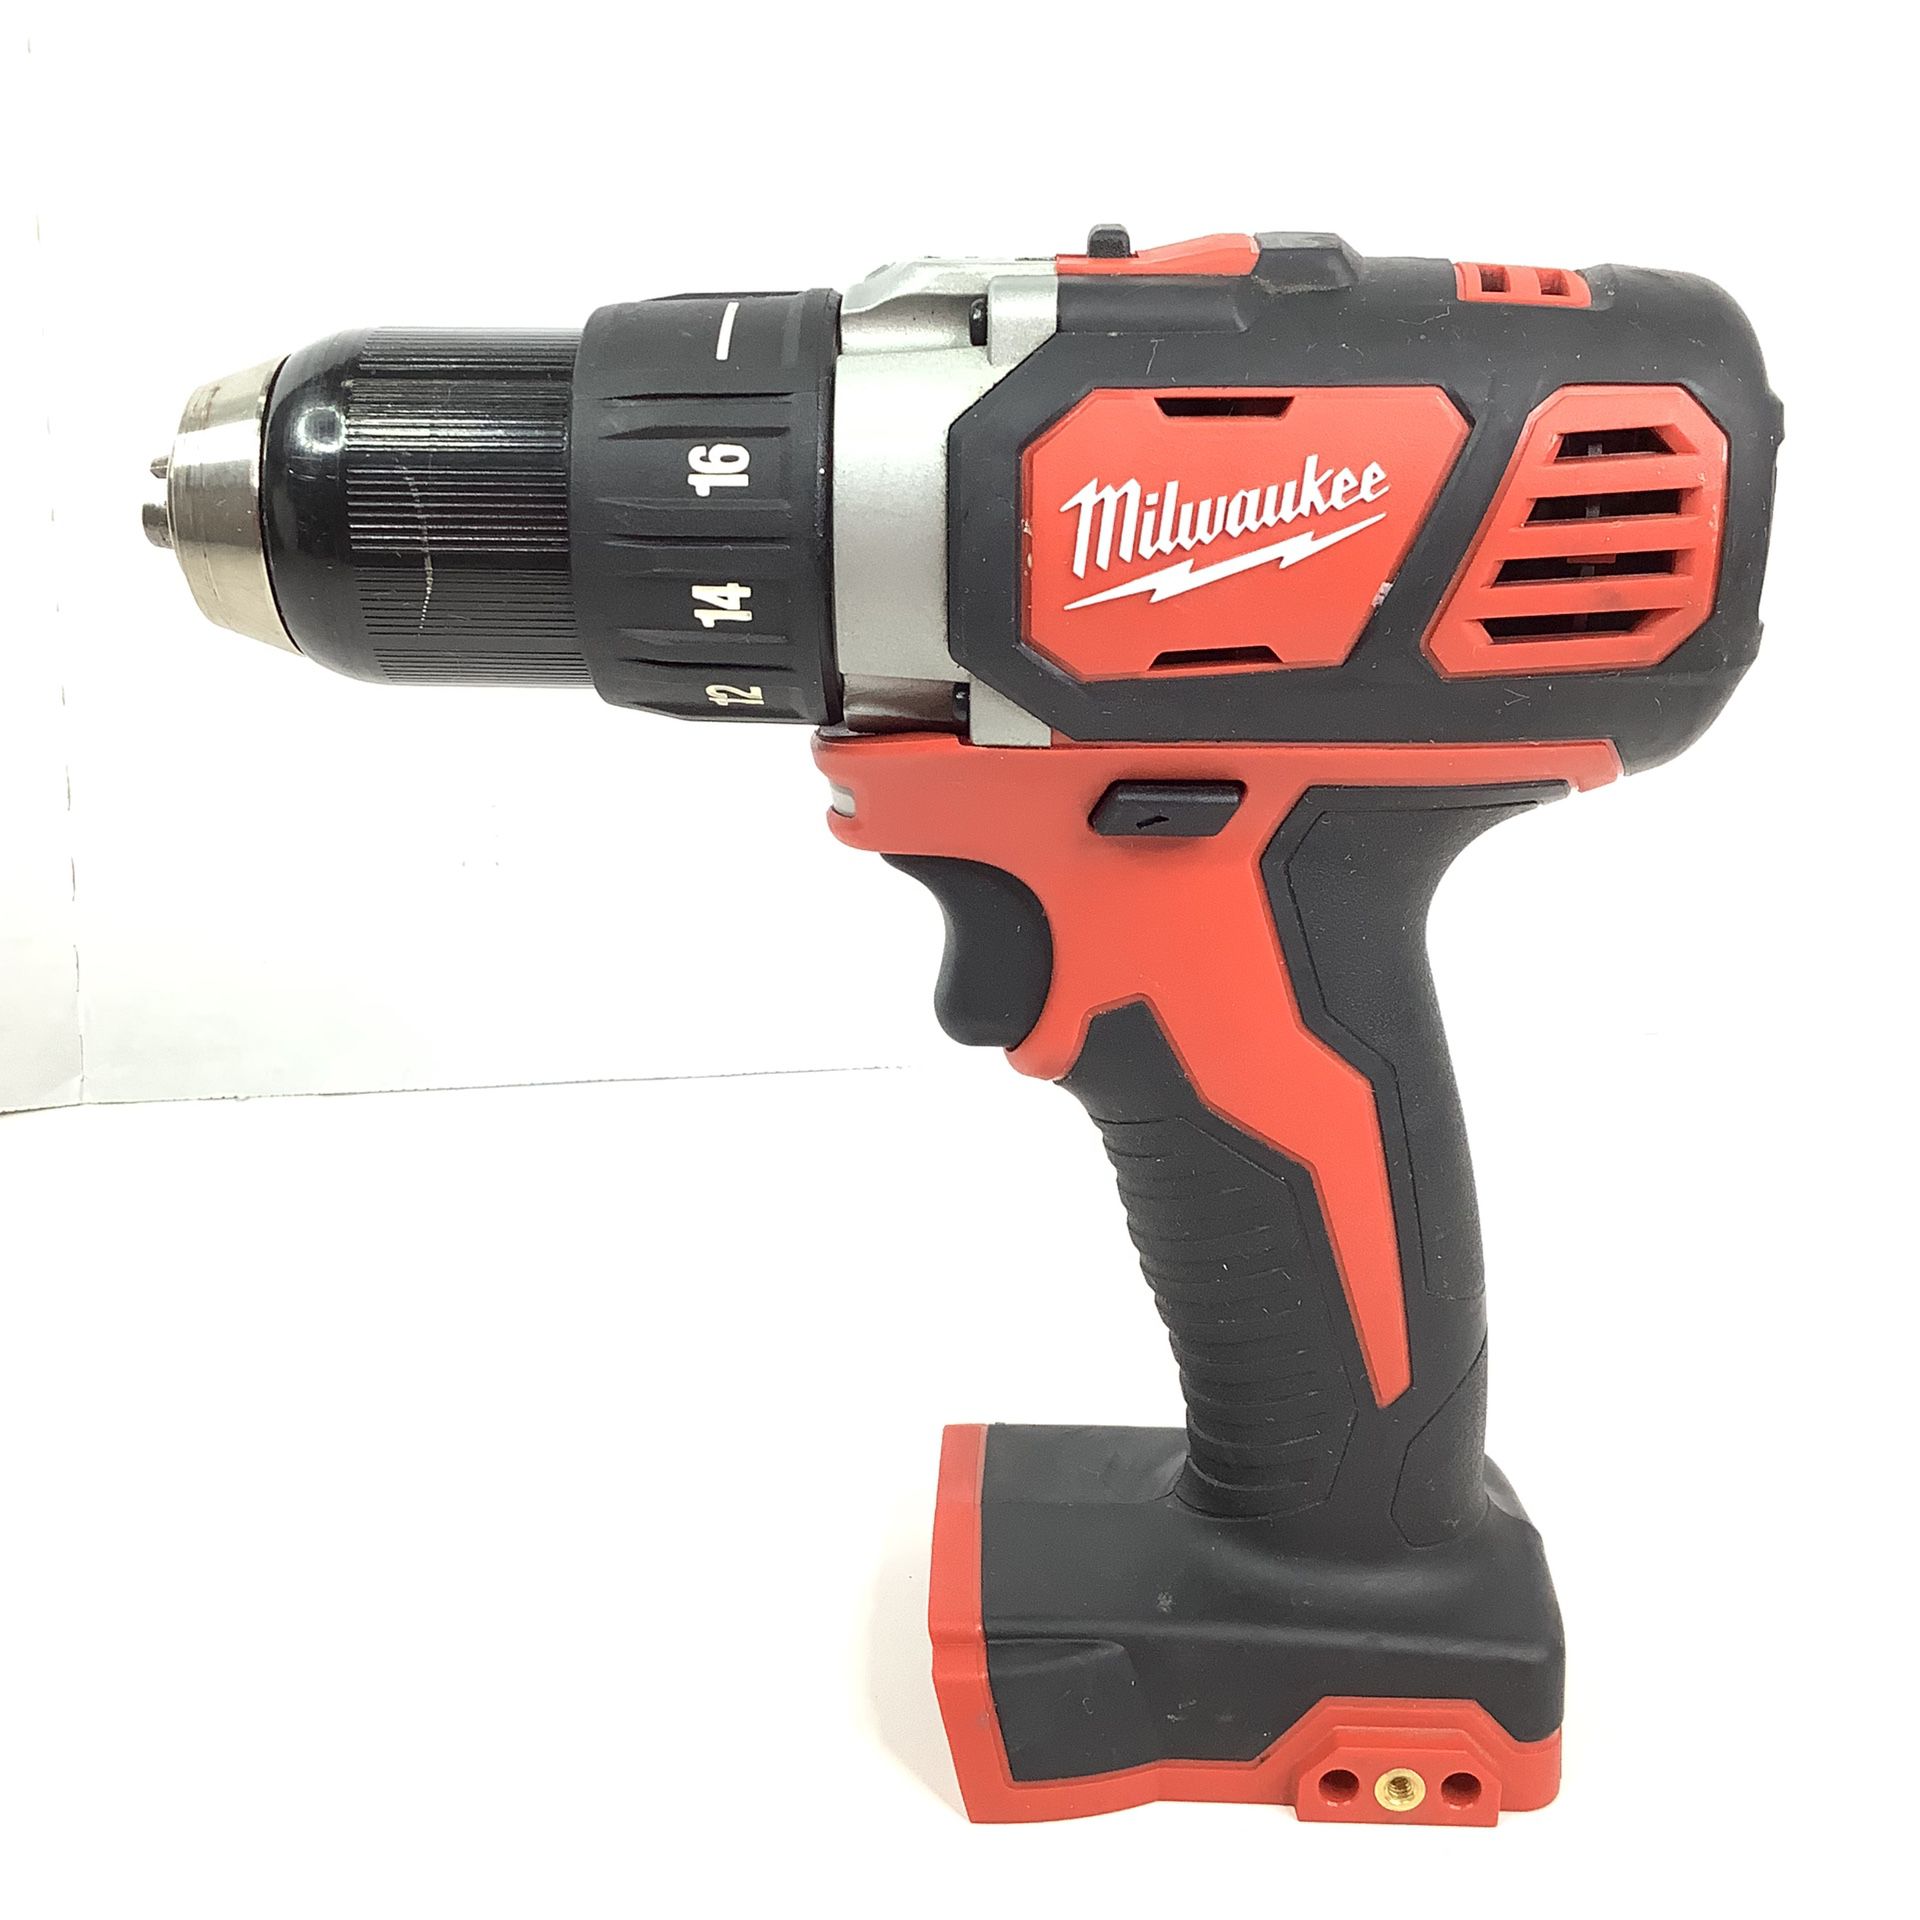 Milwaukee 1/2” Cordless Drill Driver (Tool Only) 